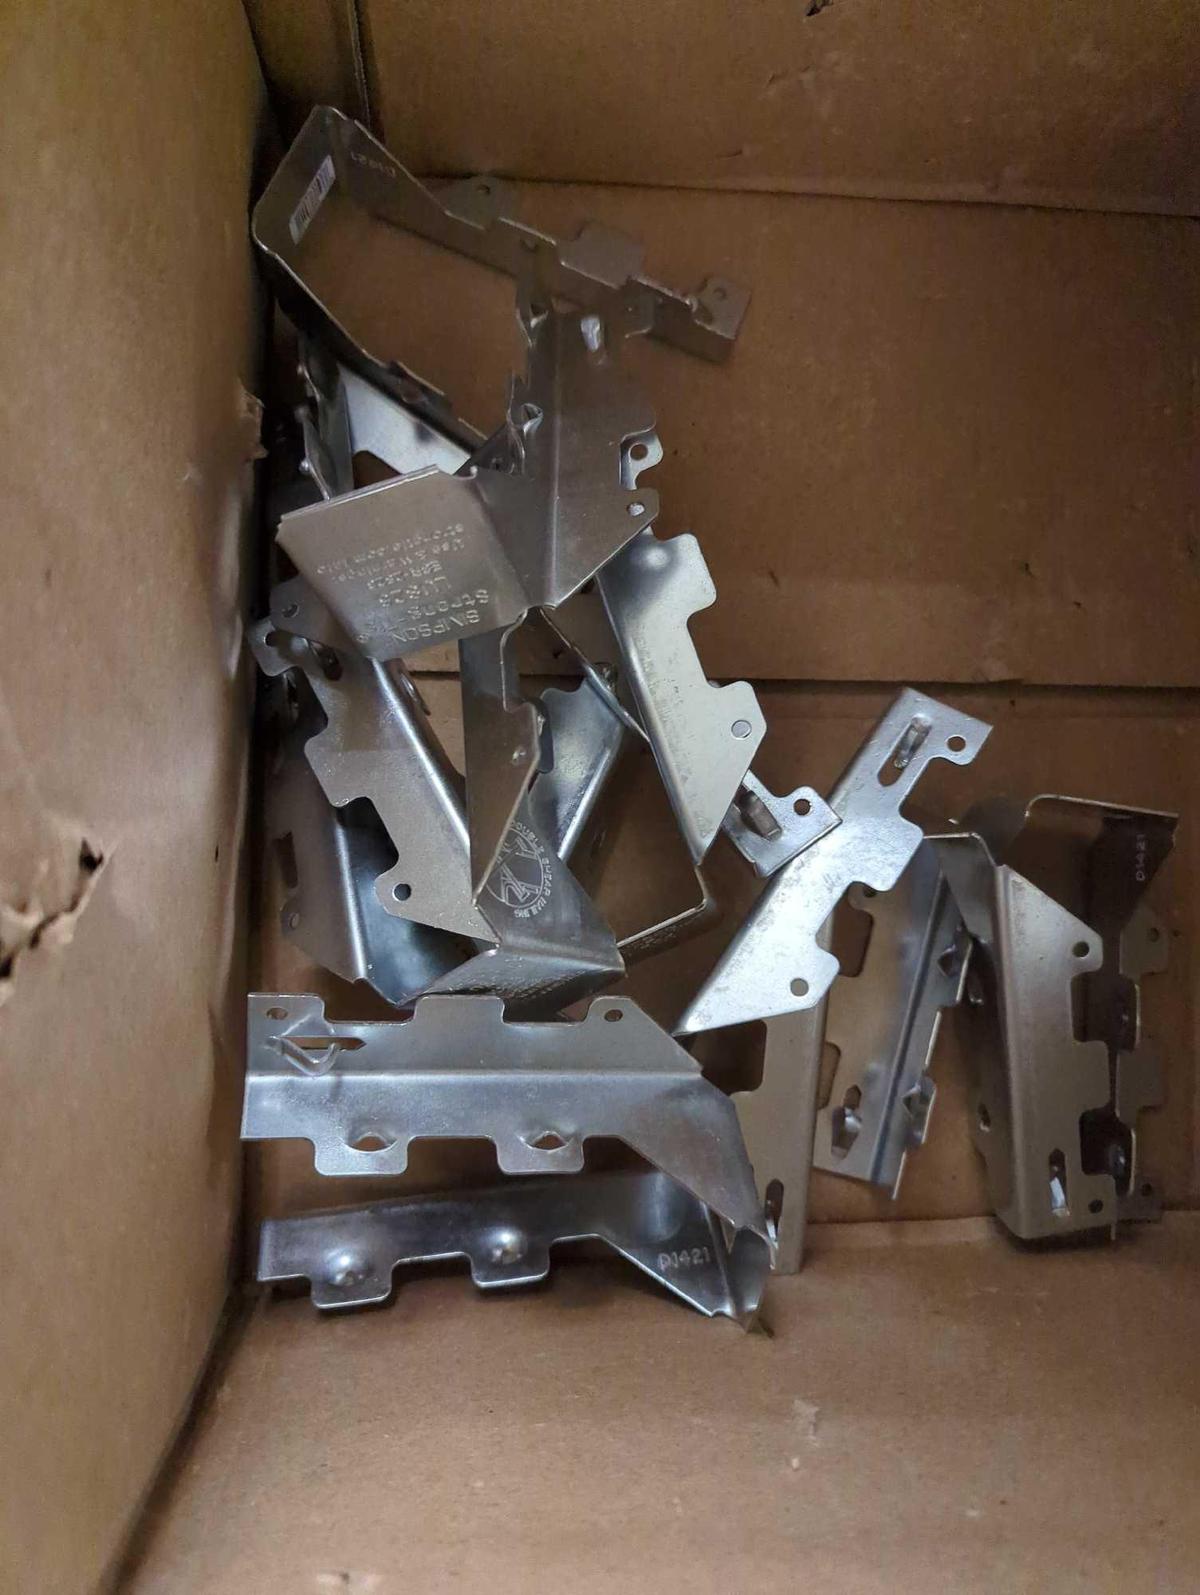 BOX OF SIMPSON STRONG TIE LUS GALVANIZED FACE MOUNT JOIST HANGER FOR 2X6 NOMINAL LUMBER APPEARS TO